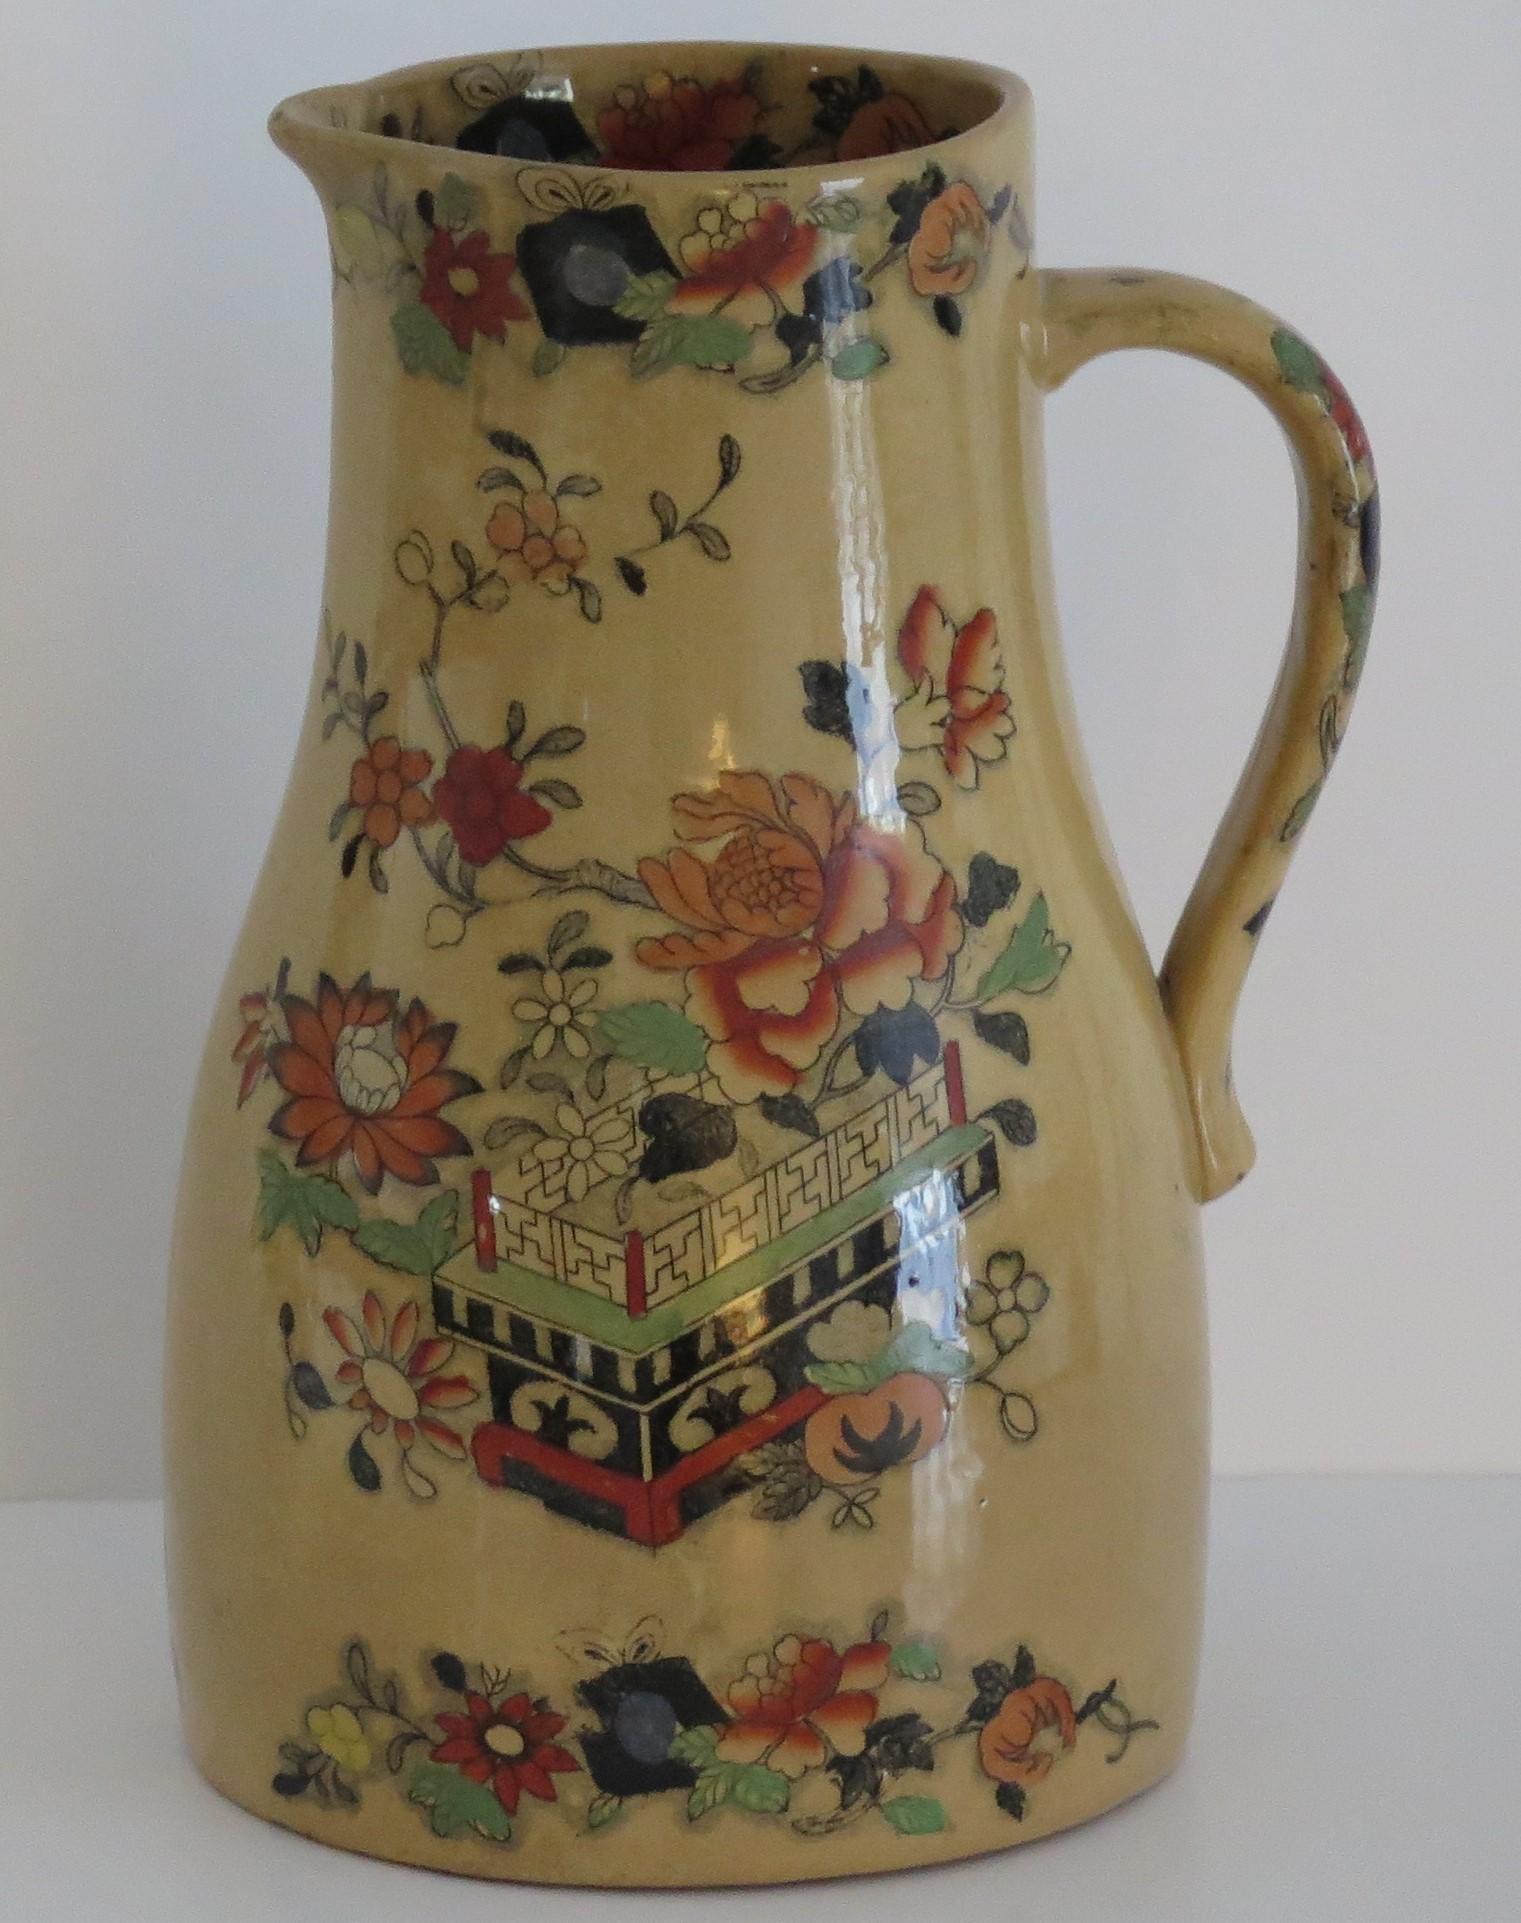 This is large jug or pitcher by Mason's Ironstone pottery in the flower box pattern all dating to the mid-19th century, circa 1830-1851 Victorian period.

This Mason's jug has a rare shape and pattern, with a beautiful ochre glaze with beautiful